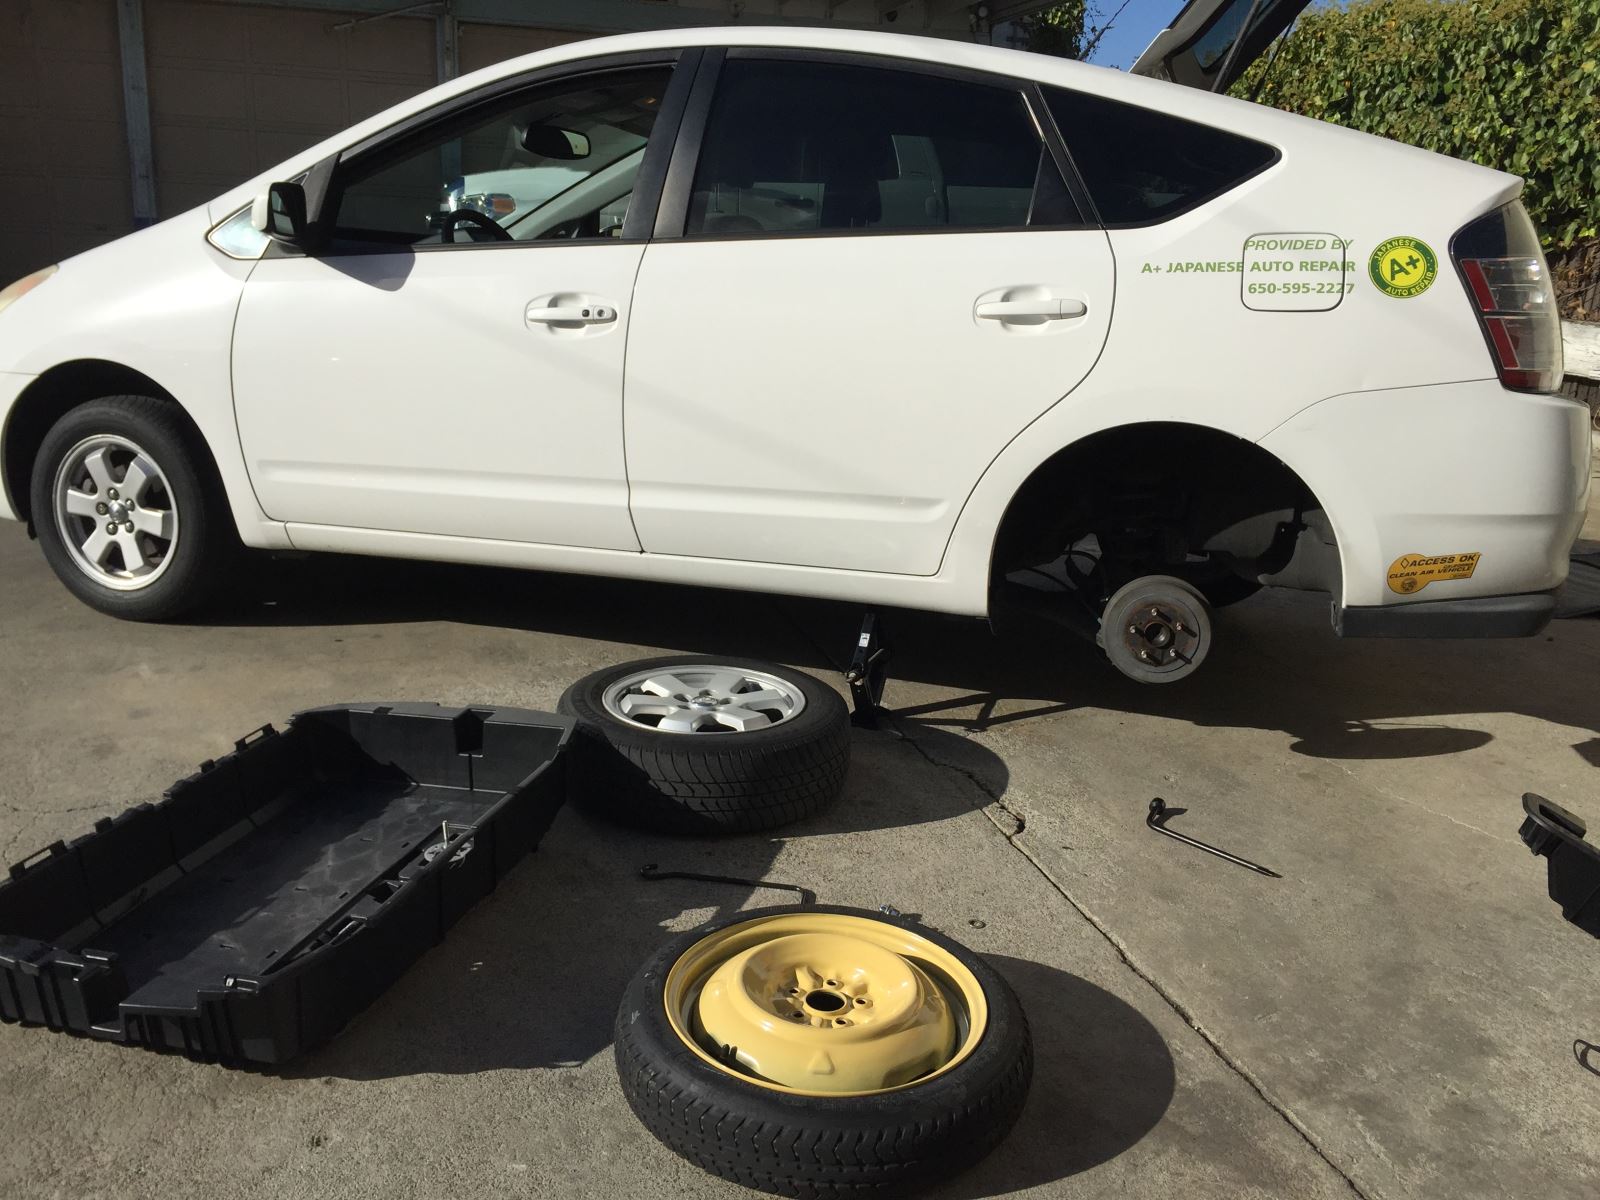 Remove the flat tire and the spare tire